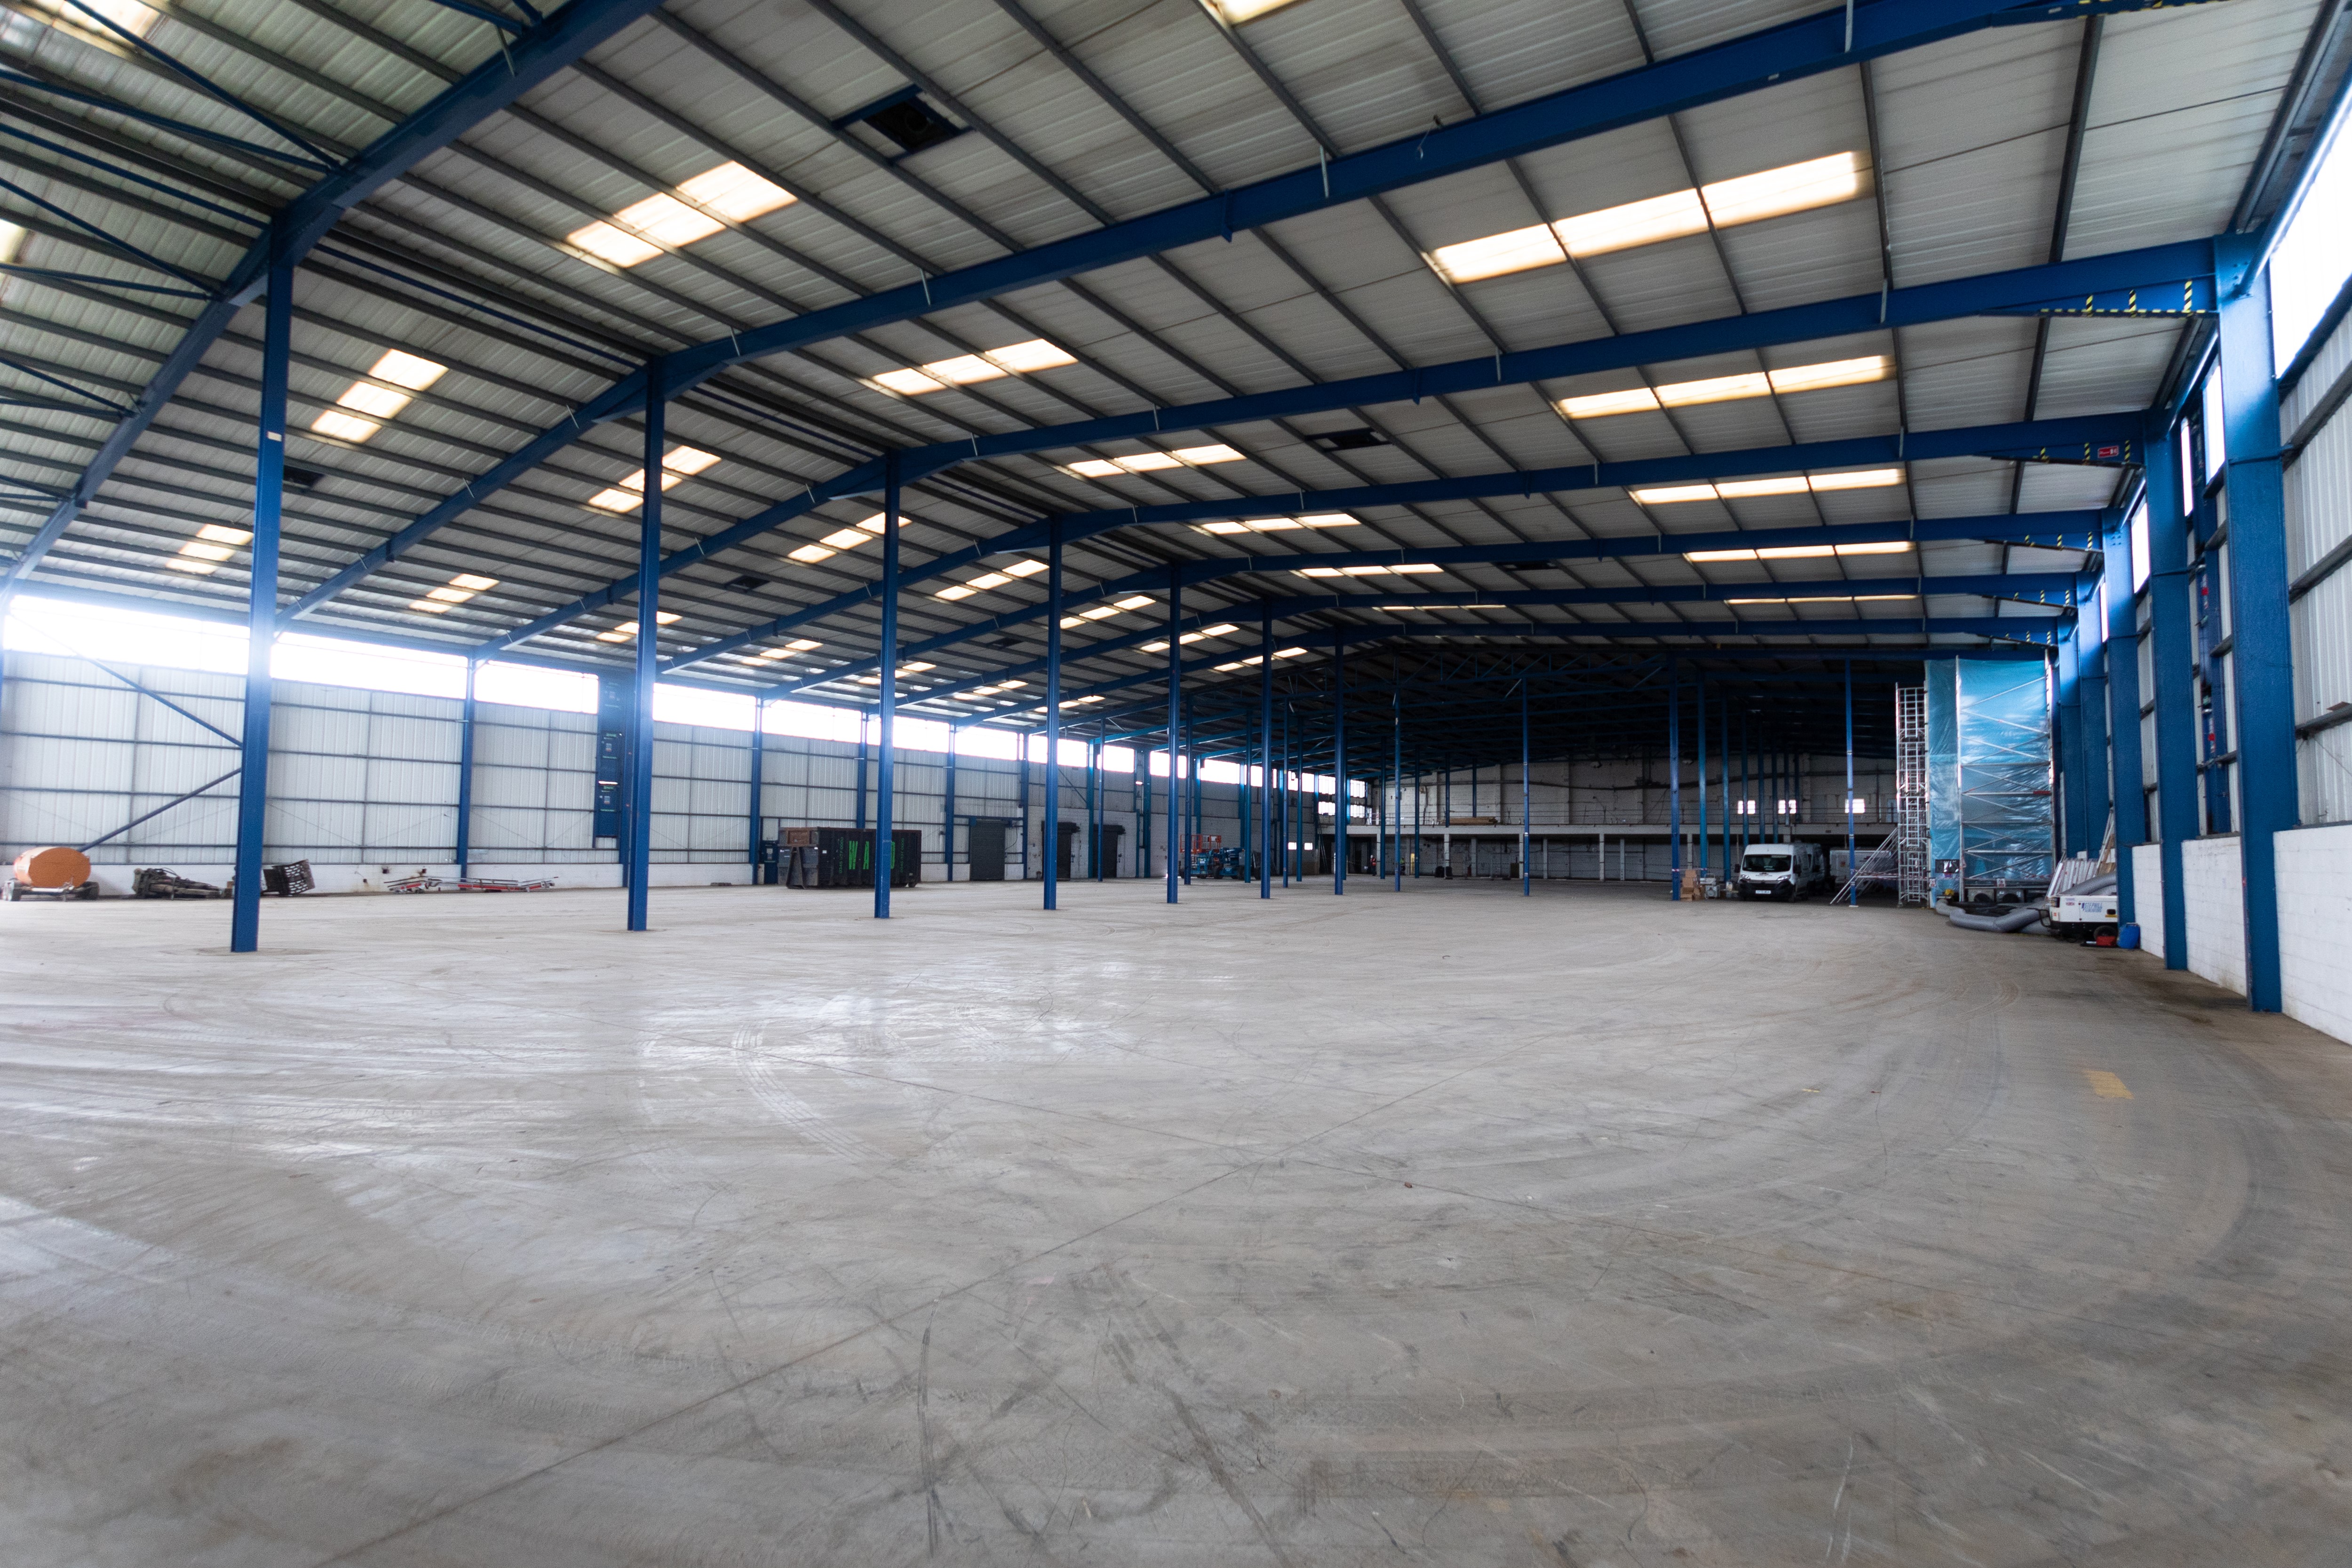 Inside of the empty Calverton warehouse before new lighting scheme and racking were installed